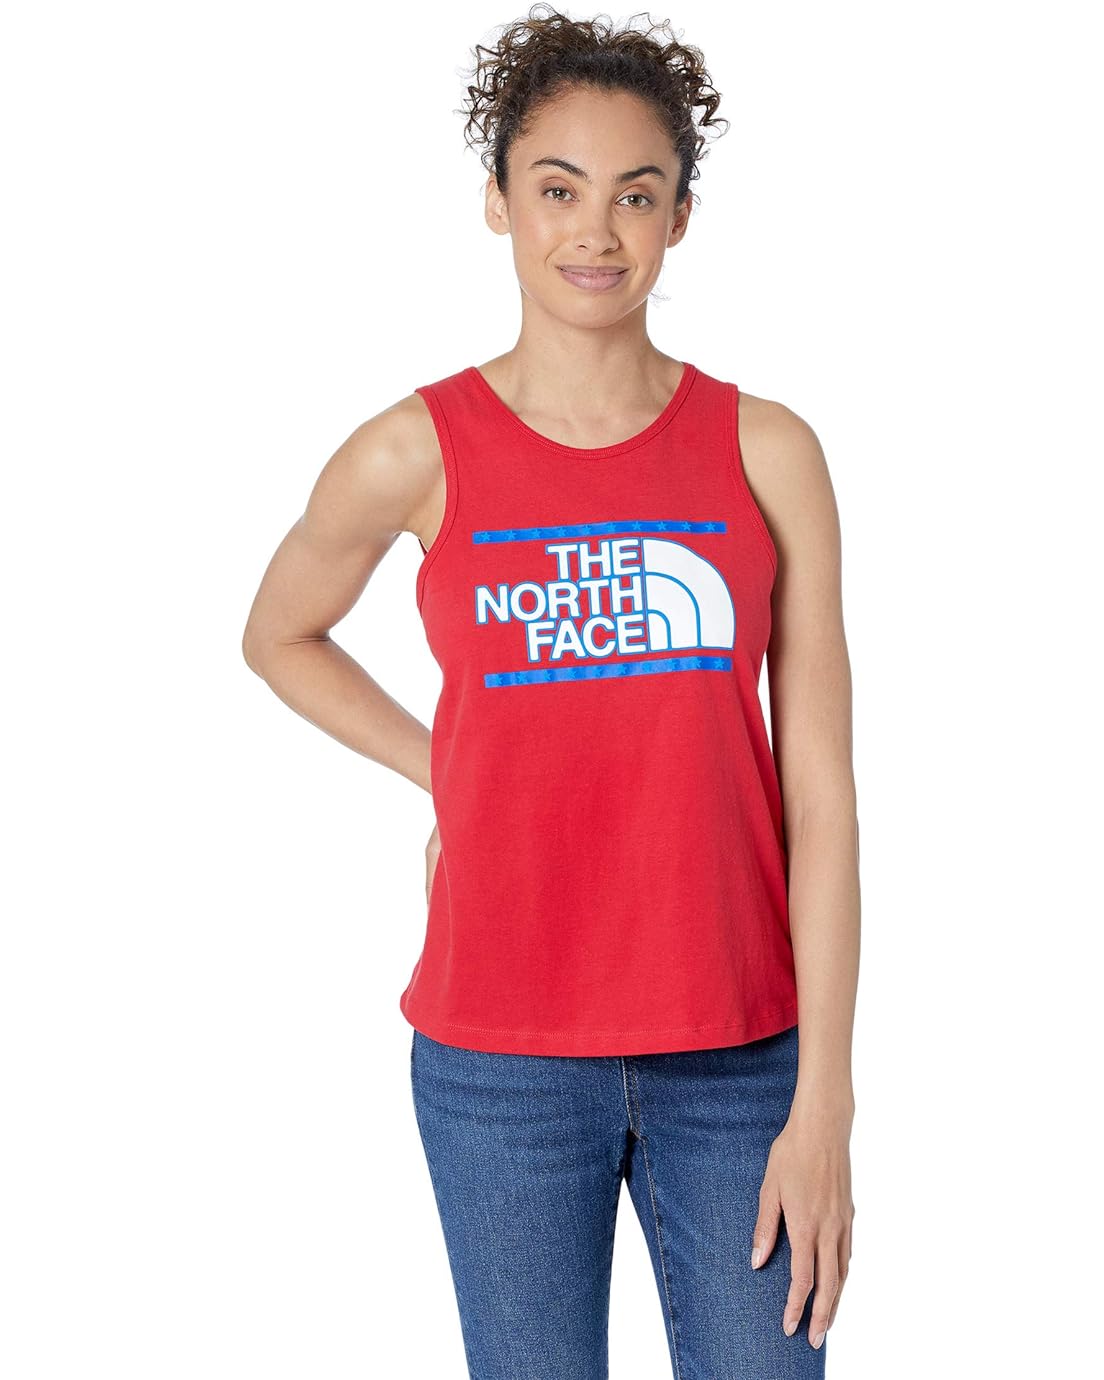 The North Face USA Tank Top